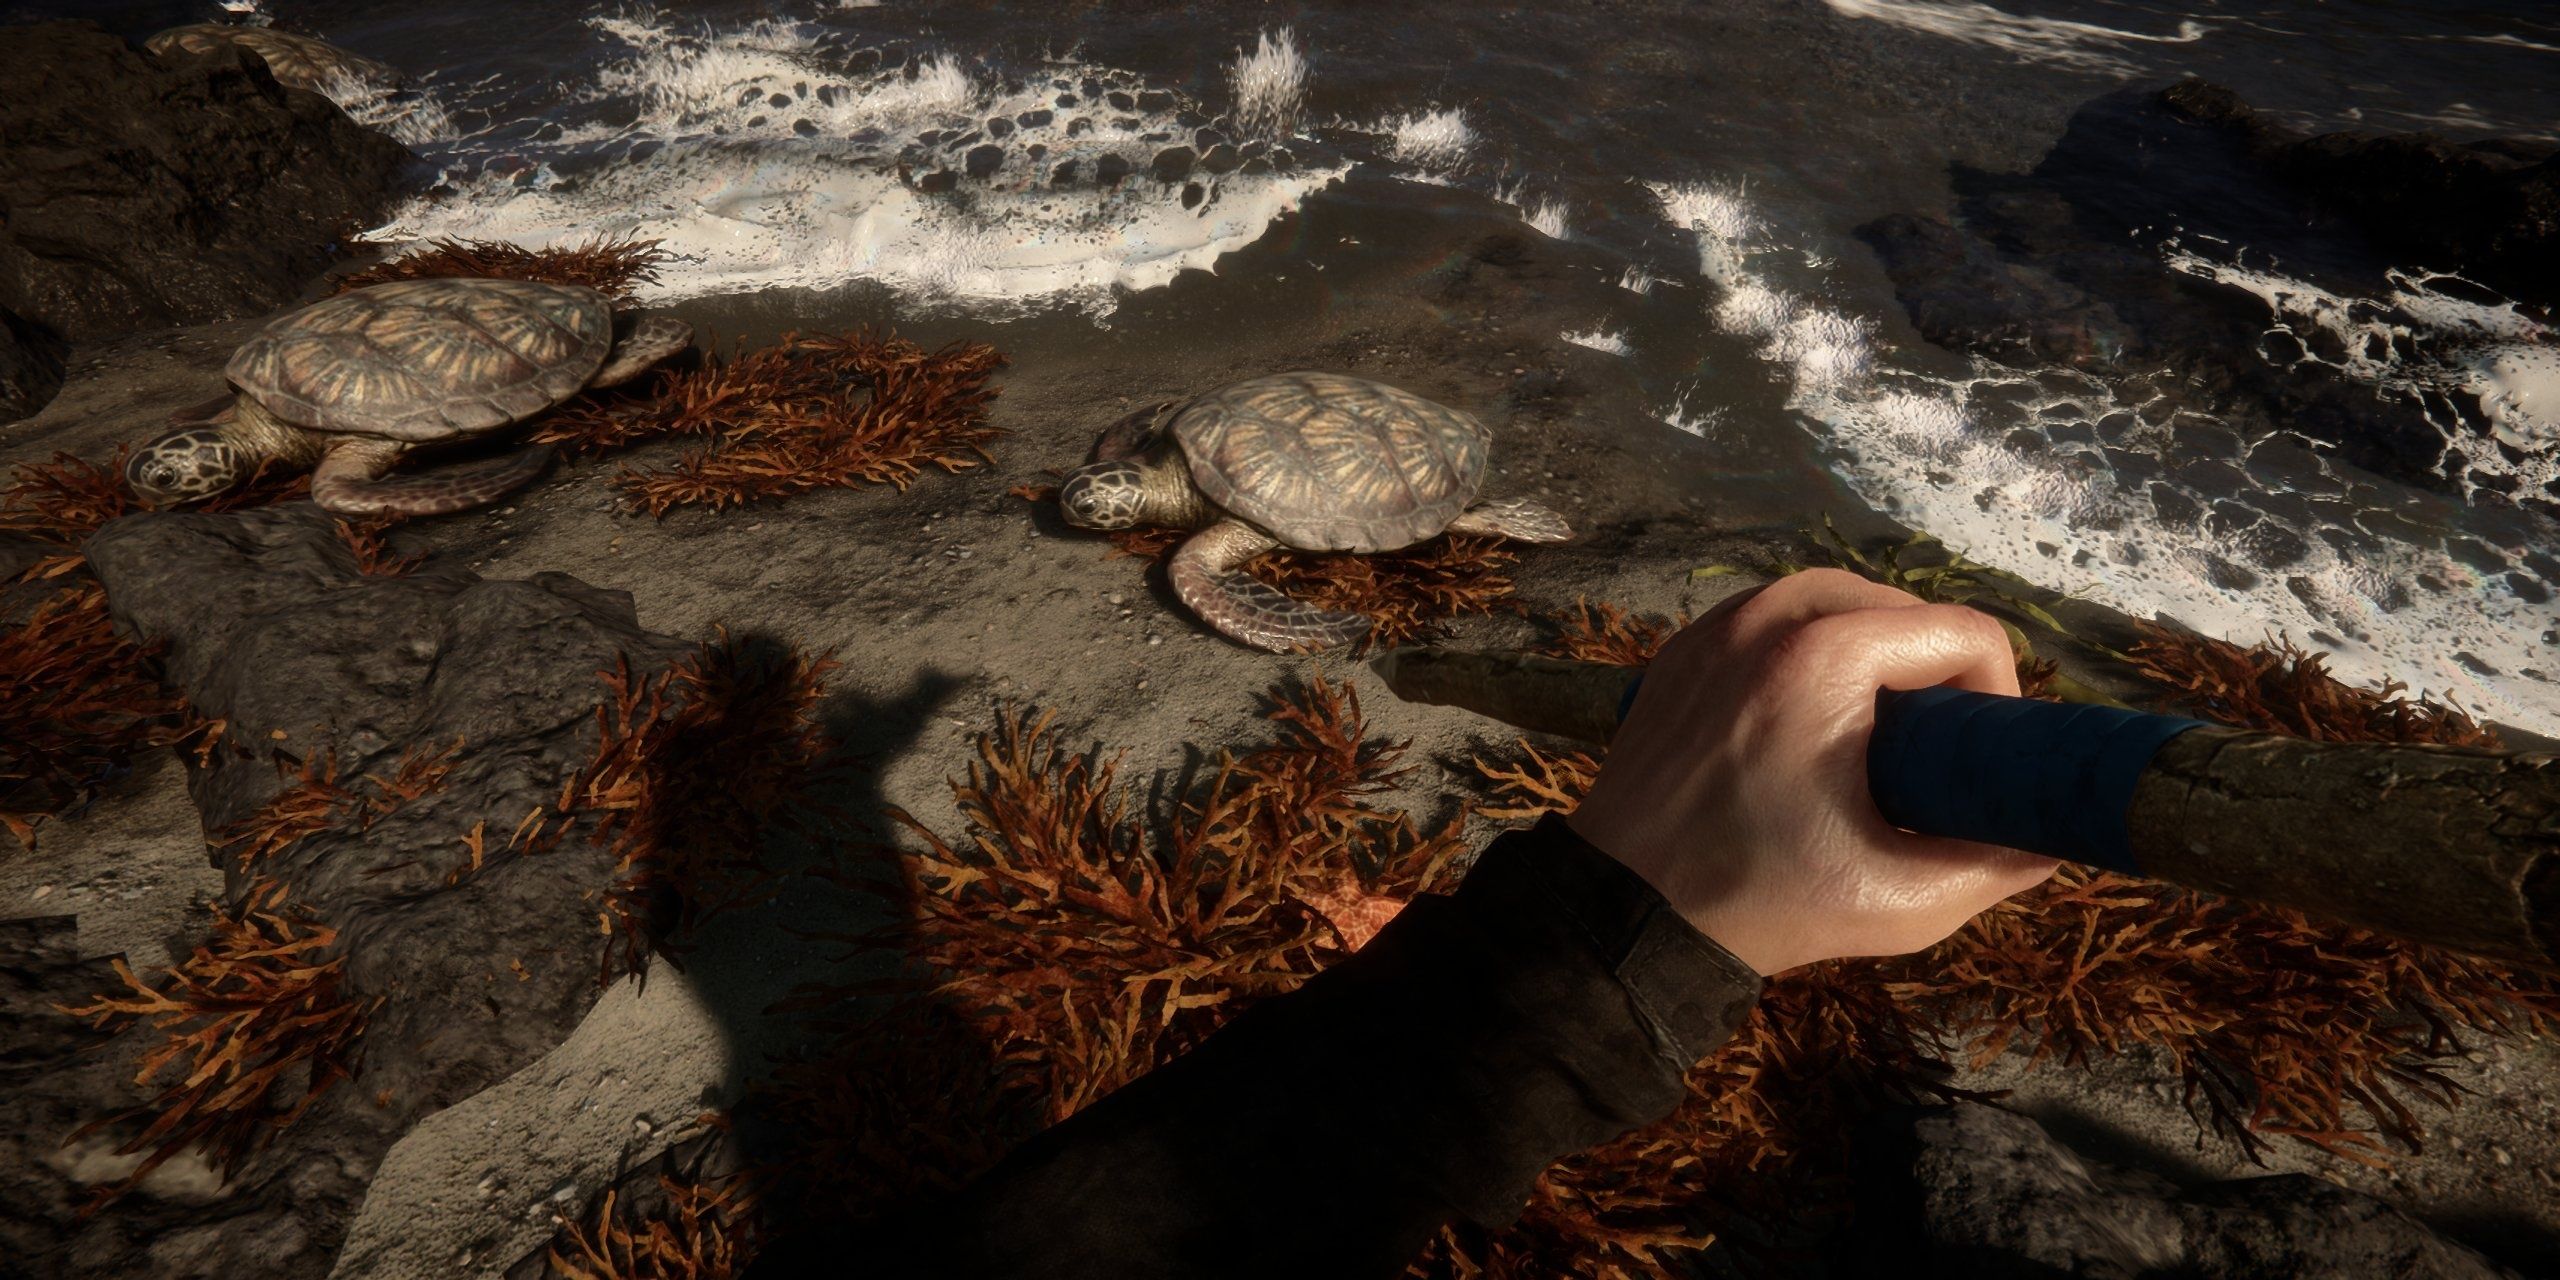 Screenshot from the game Sons Of The Forest showing the player character hunting a tortoise